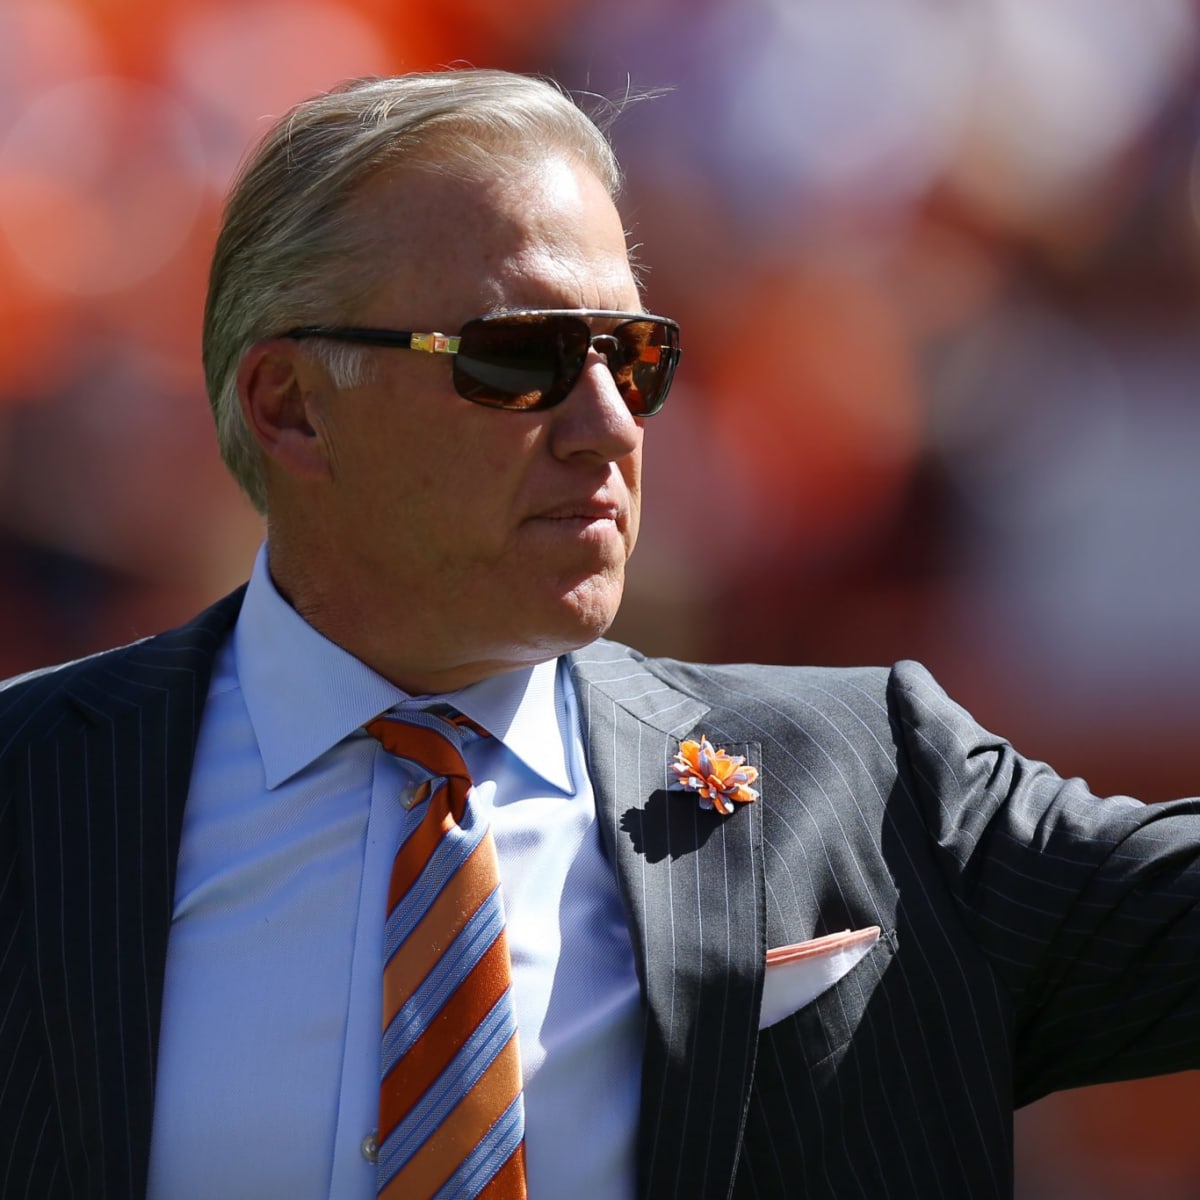 Broncos extend their condolences to the Elway family on the March